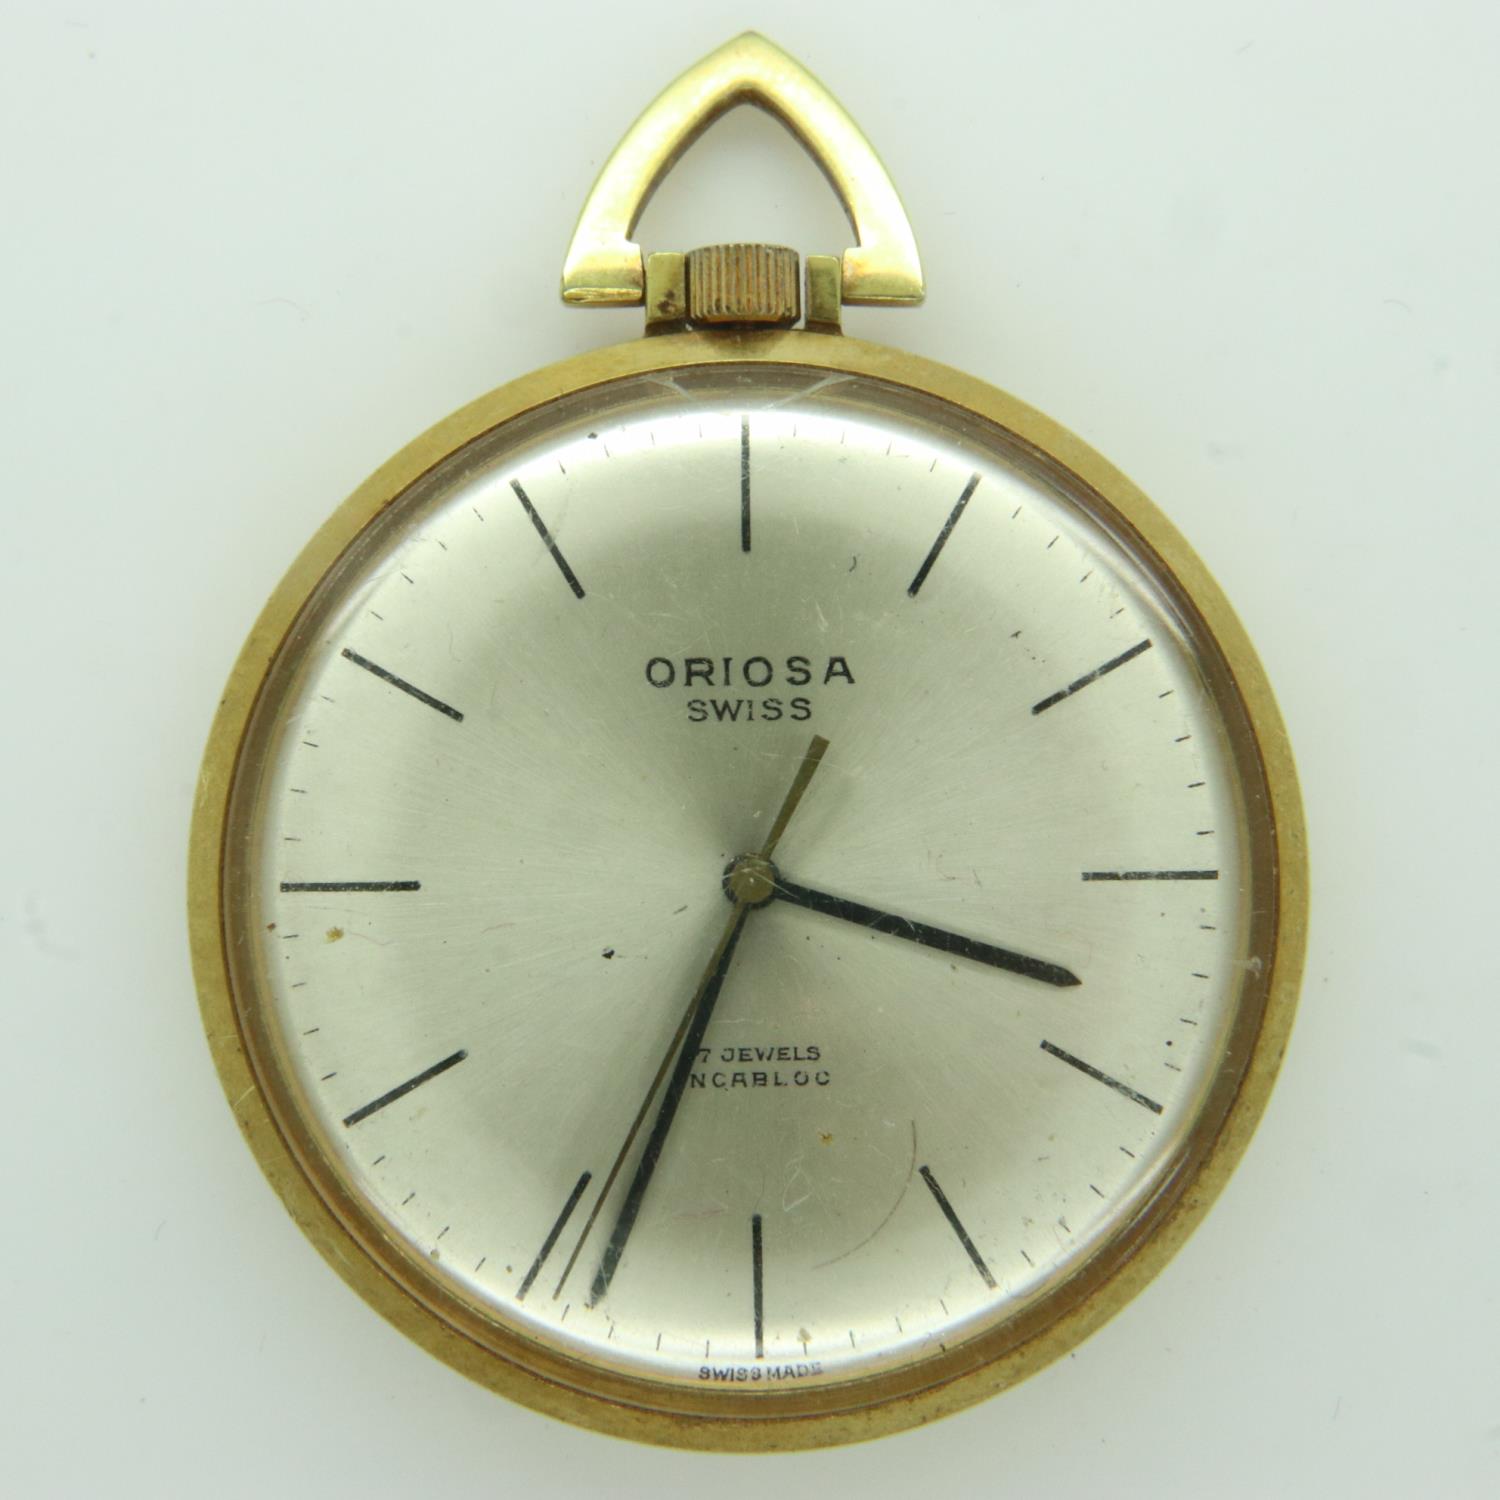 ORIOSA: open face Art Deco gold plated crown wind pocket watch, works for a short time then stops.